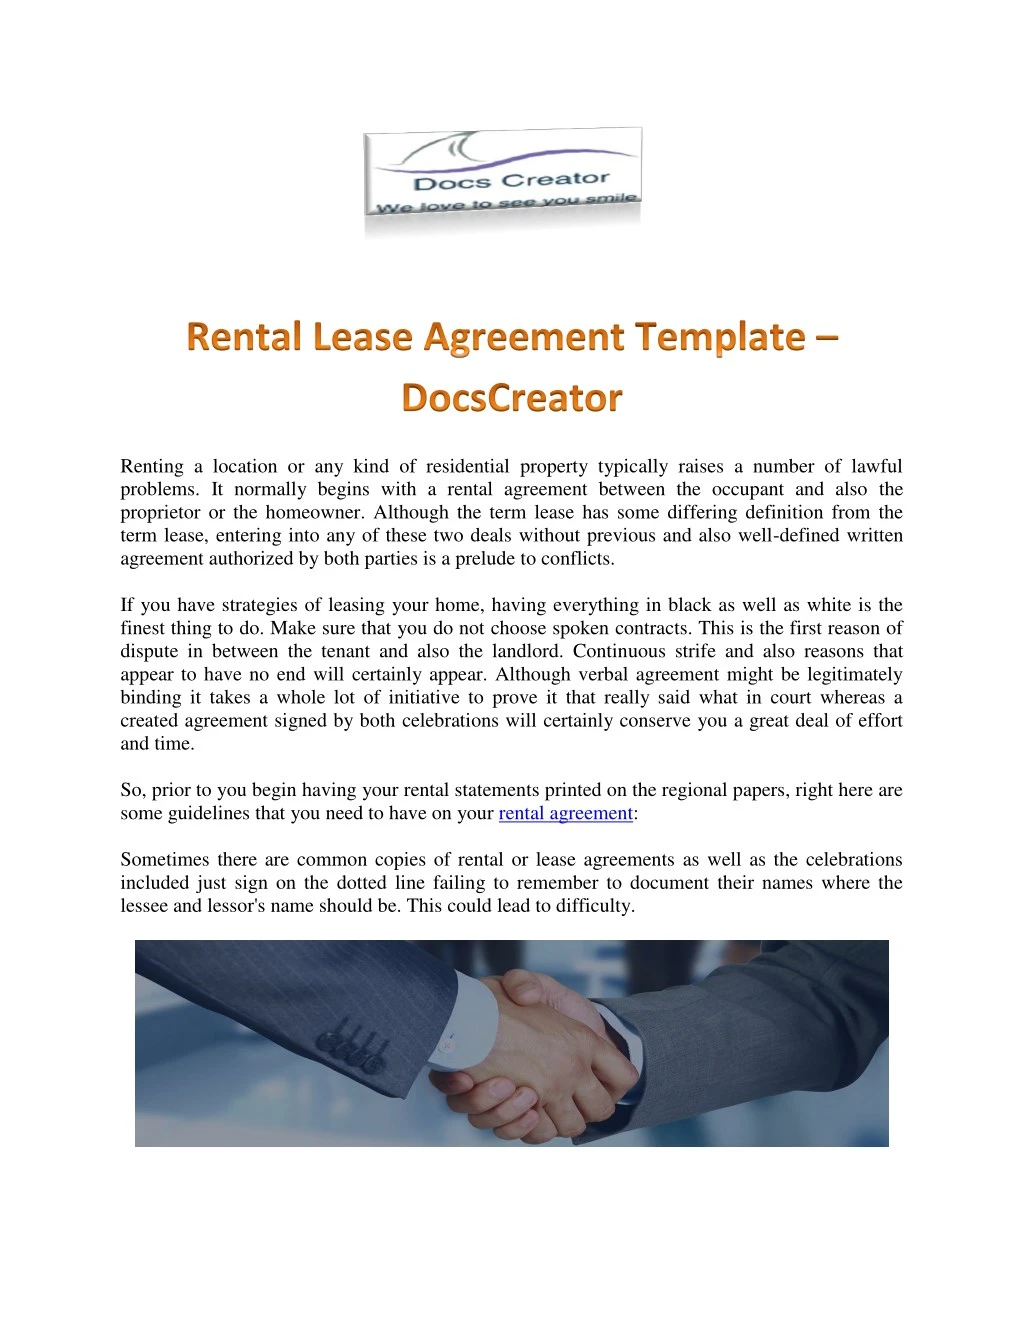 renting a location or any kind of residential